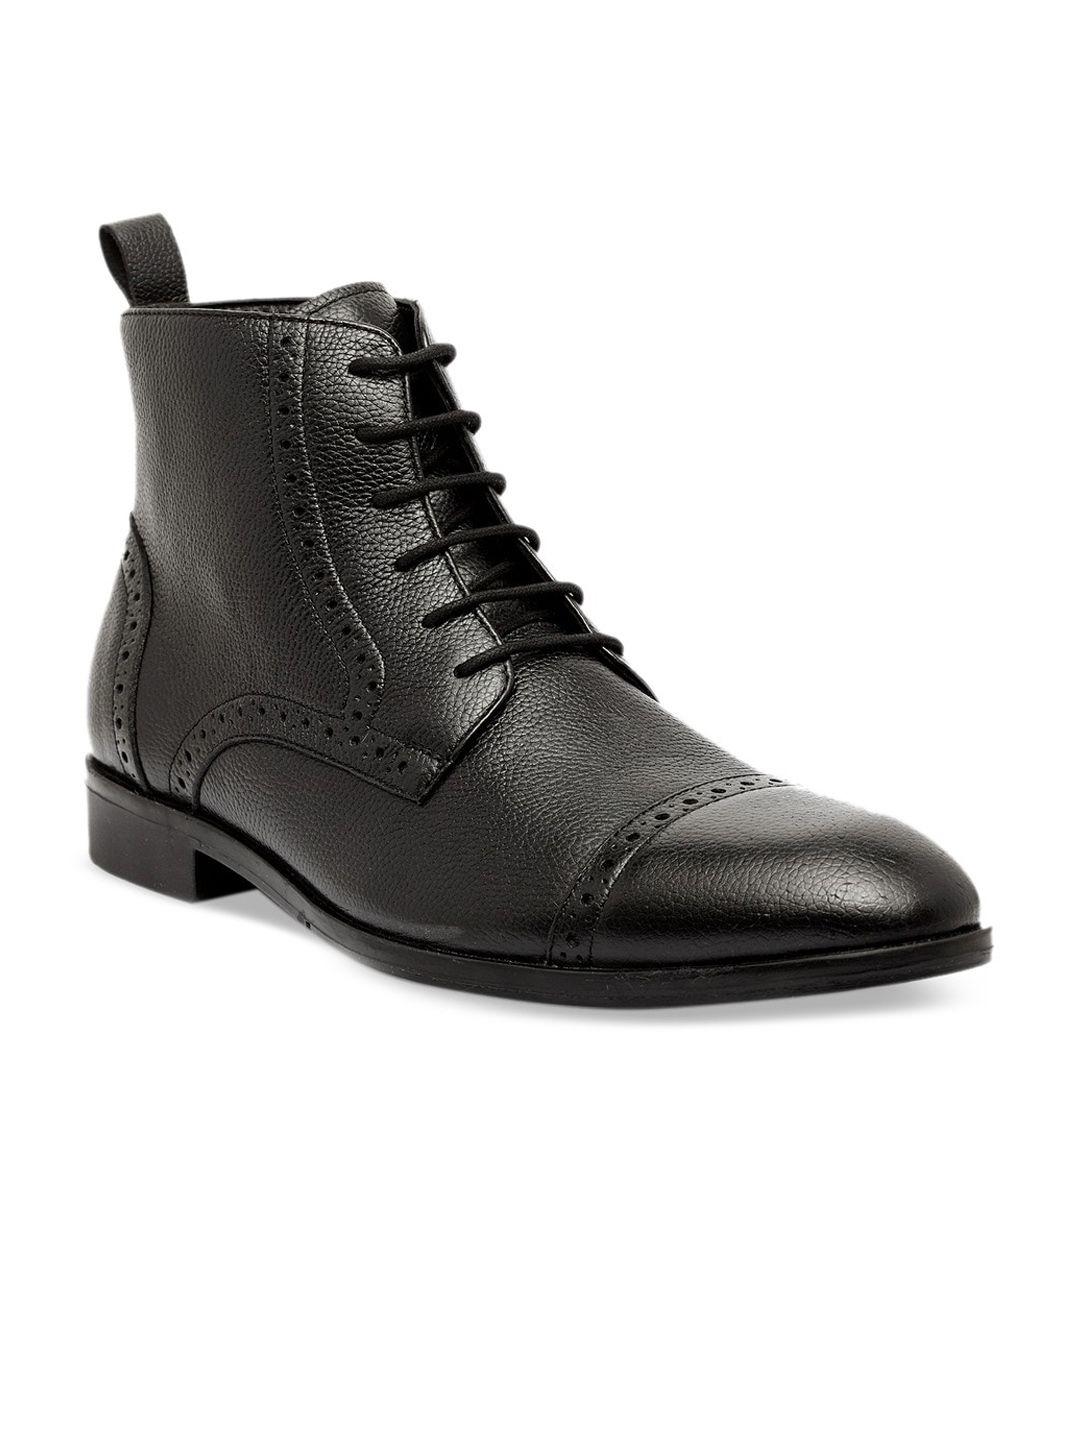 teakwood leathers  men black solid leather lace-ups boots